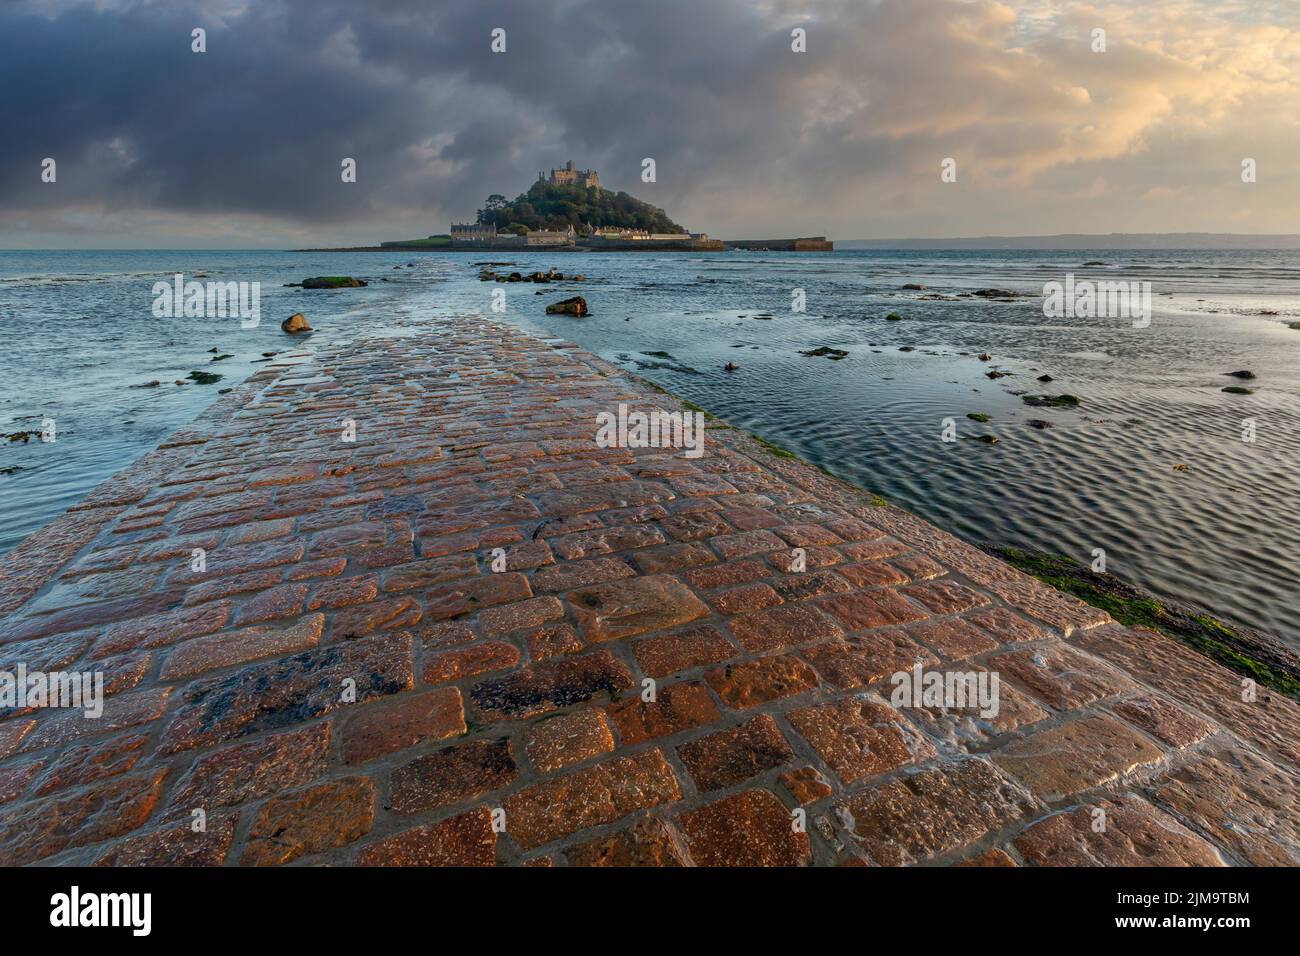 st michaels mount cornwall and flooded causeway at sunset with clearing storm no people Stock Photo